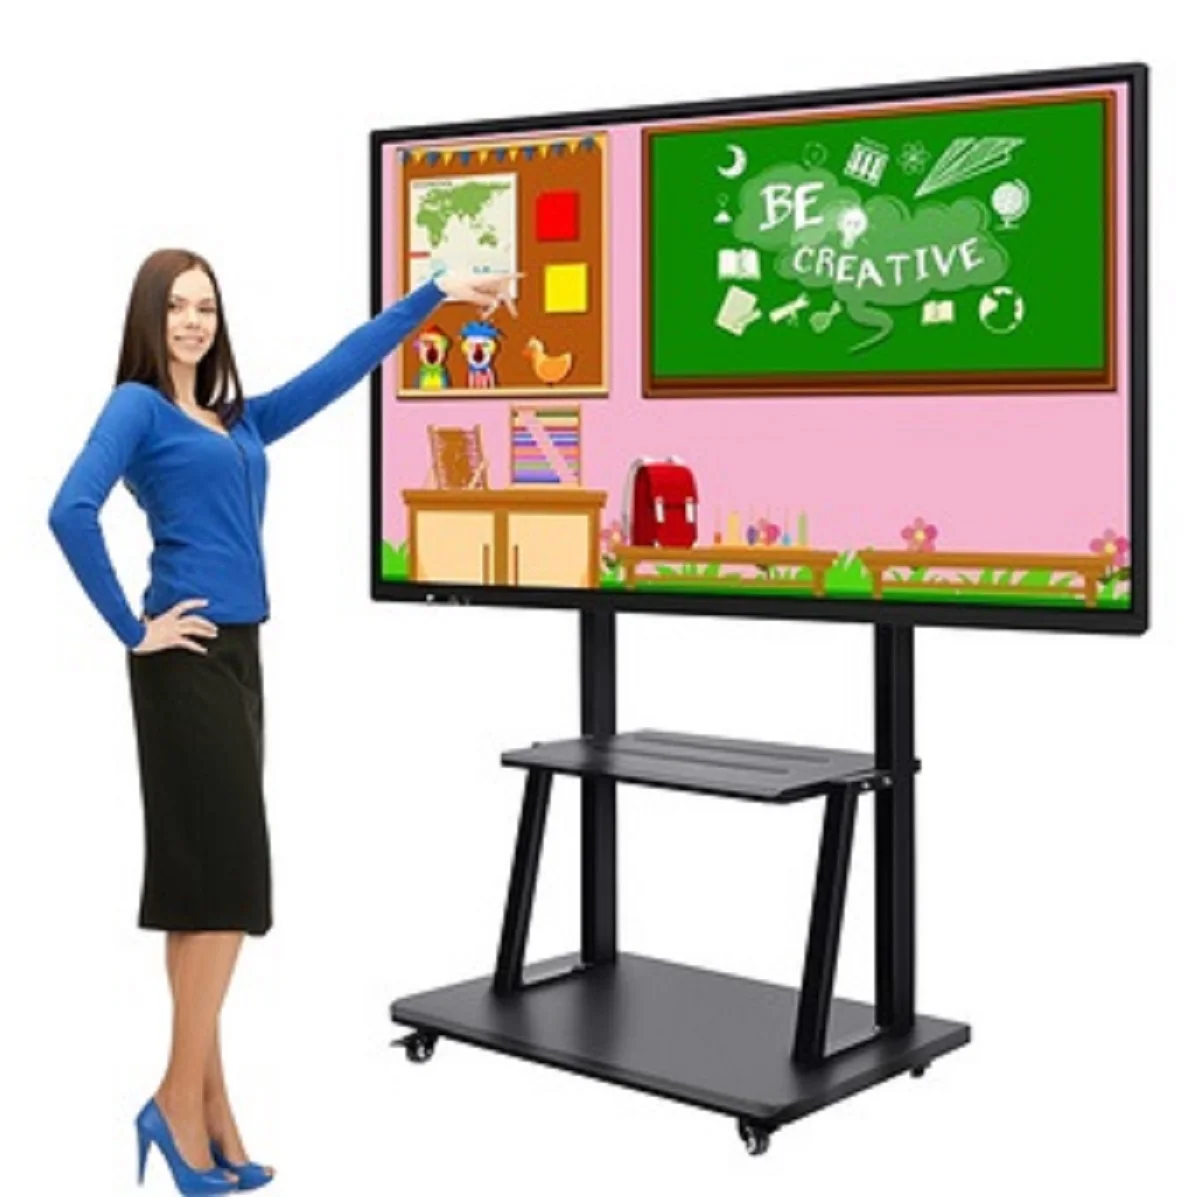 

Portable 4k UHD Led Lcd Smart Board Touch Display Interactive Whiteboard Touchscreen 86 inch for Teaching Meeting